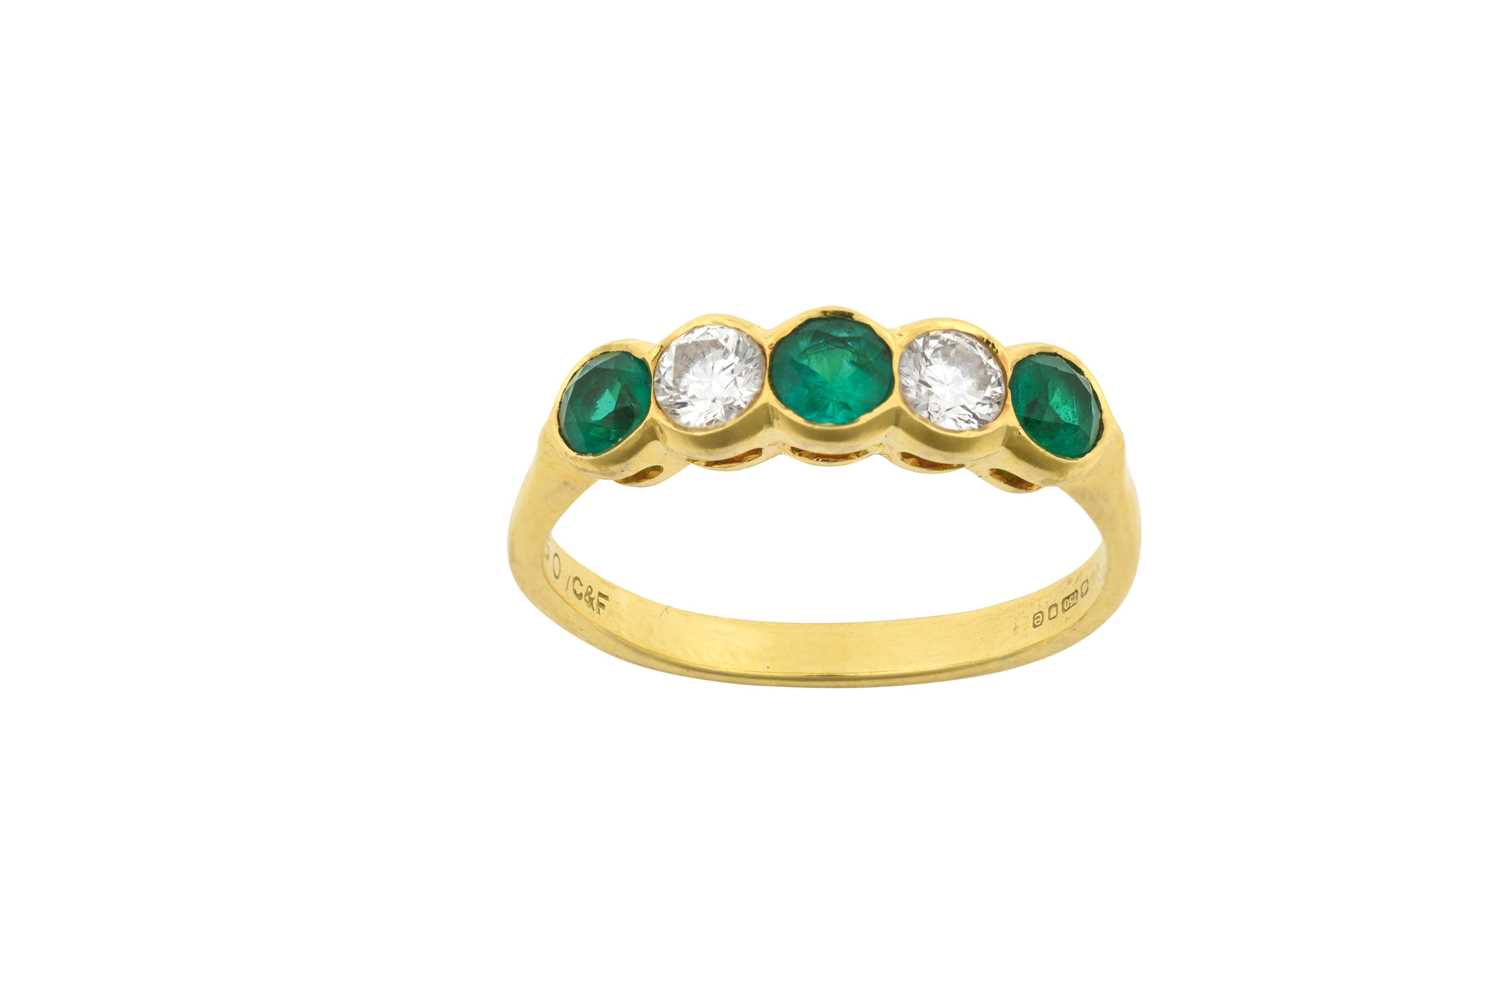 An 18 Carat Gold Emerald and Diamond Five Stone Ring three round cut emeralds alternate with two